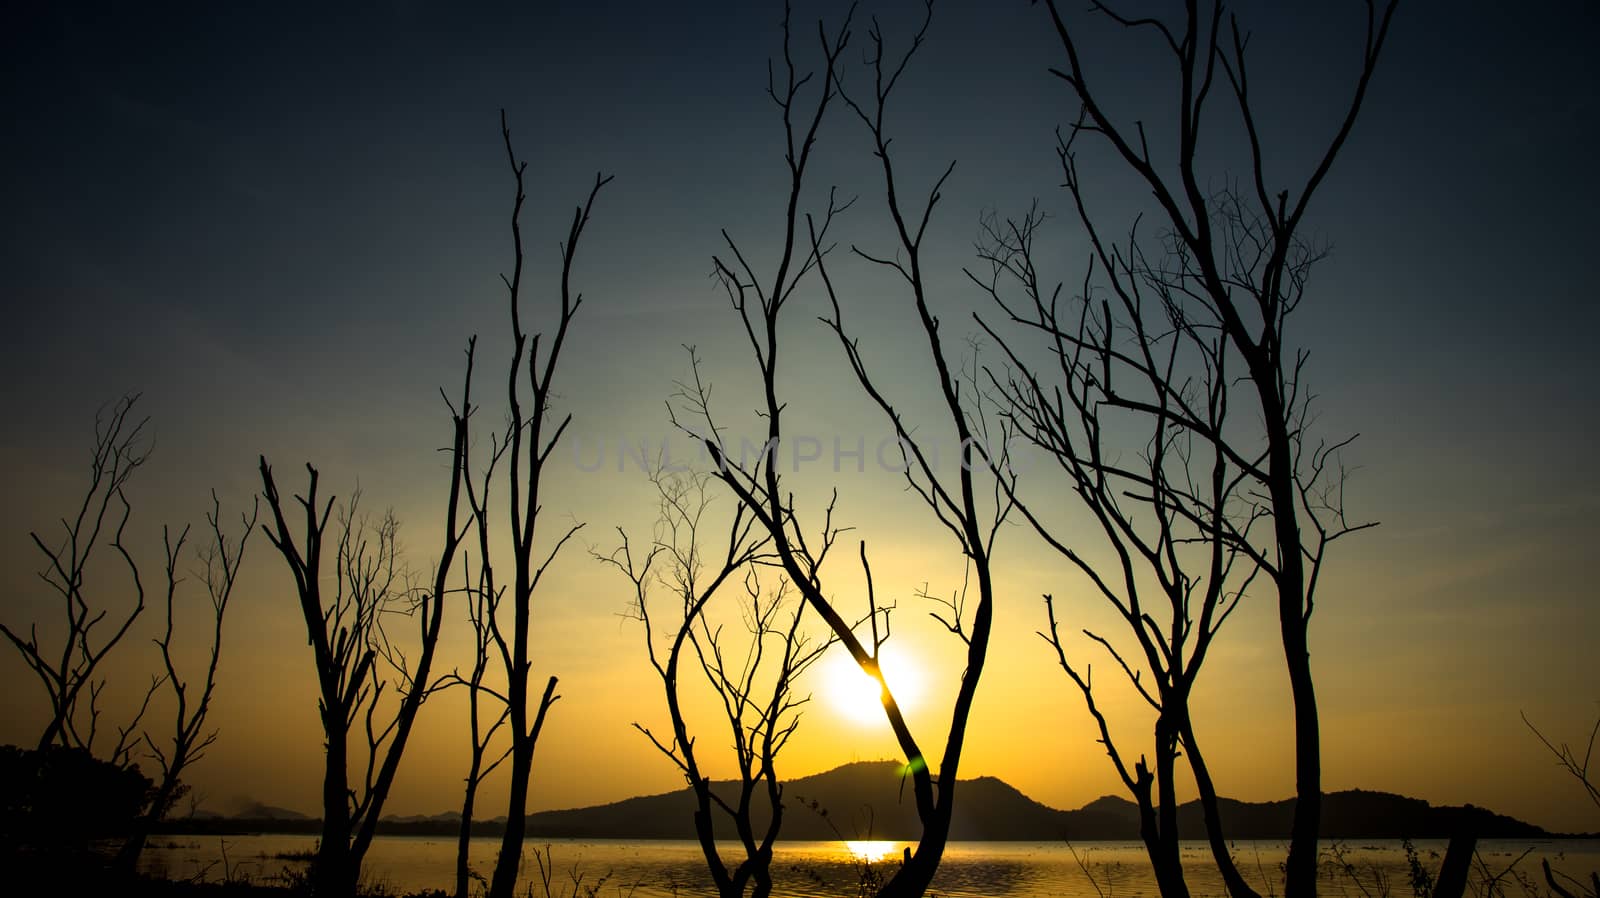 Dried tree beside lake and mountain with sunset sky by pixbox77